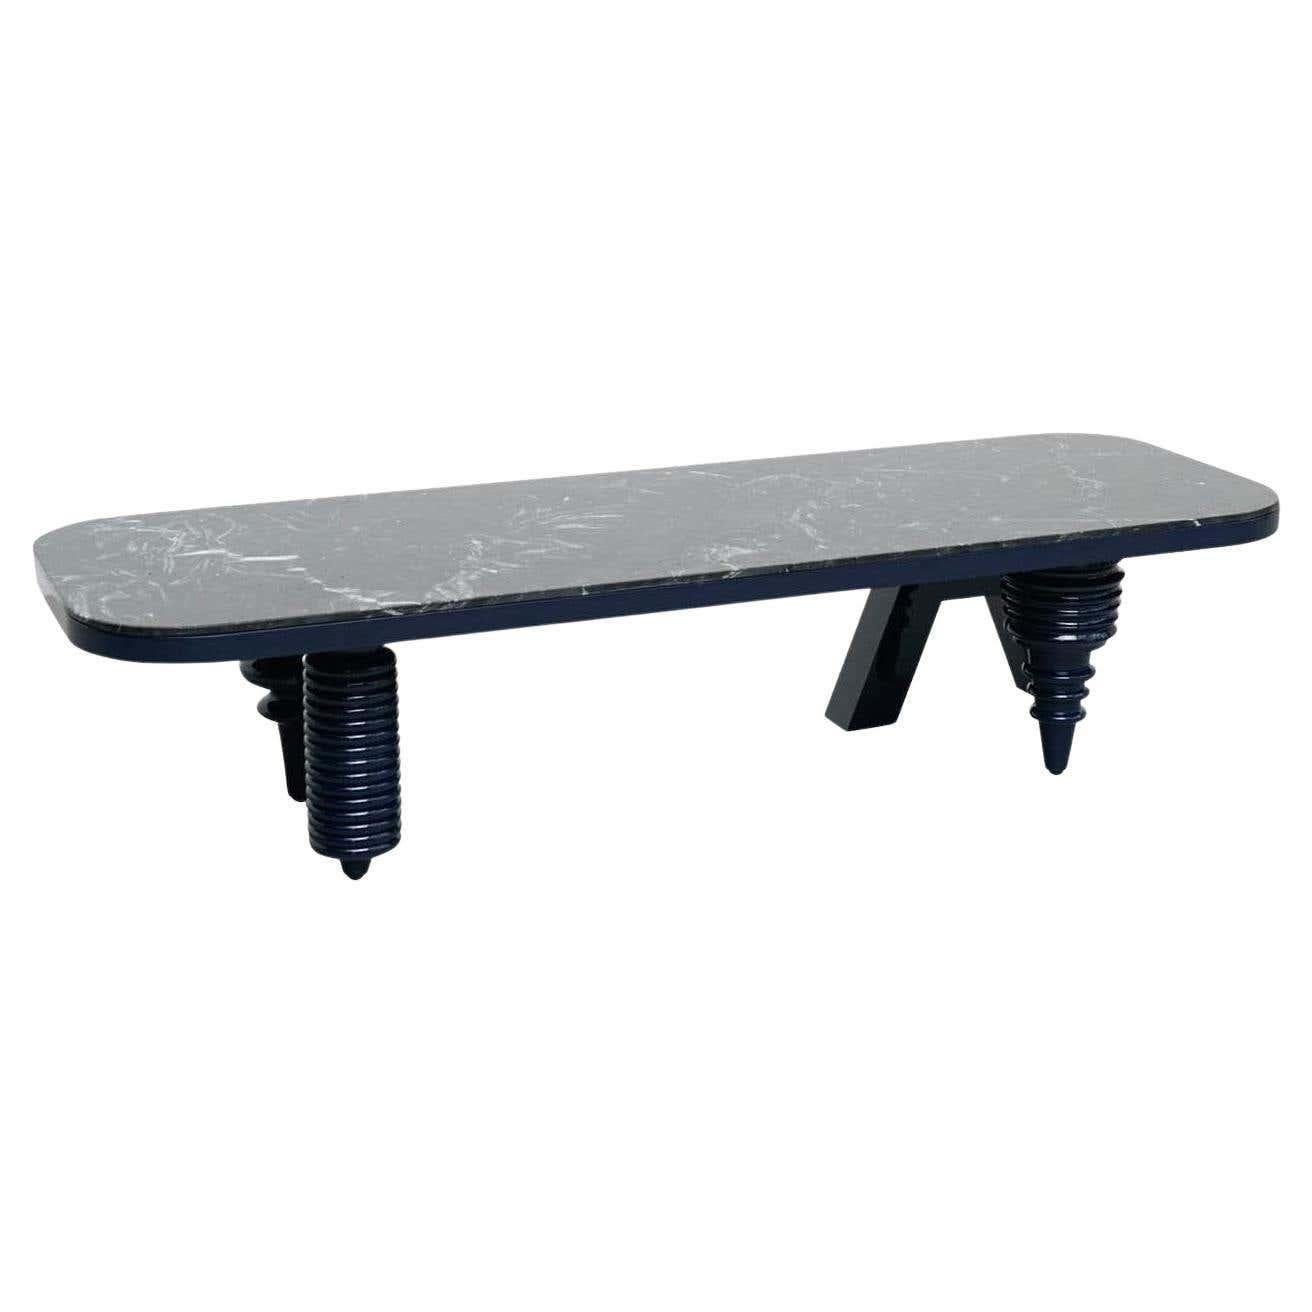 Design by Jaime Hayon, 2016
Manufactured by BD Barcelona.

Low table with rectangular black marble top. The legs have blue lacquered finishes.

Measures: D 50cm x W 150cm x H 35 cm

About the designer:
Born in Madrid in 1974, Jaime Hayon can